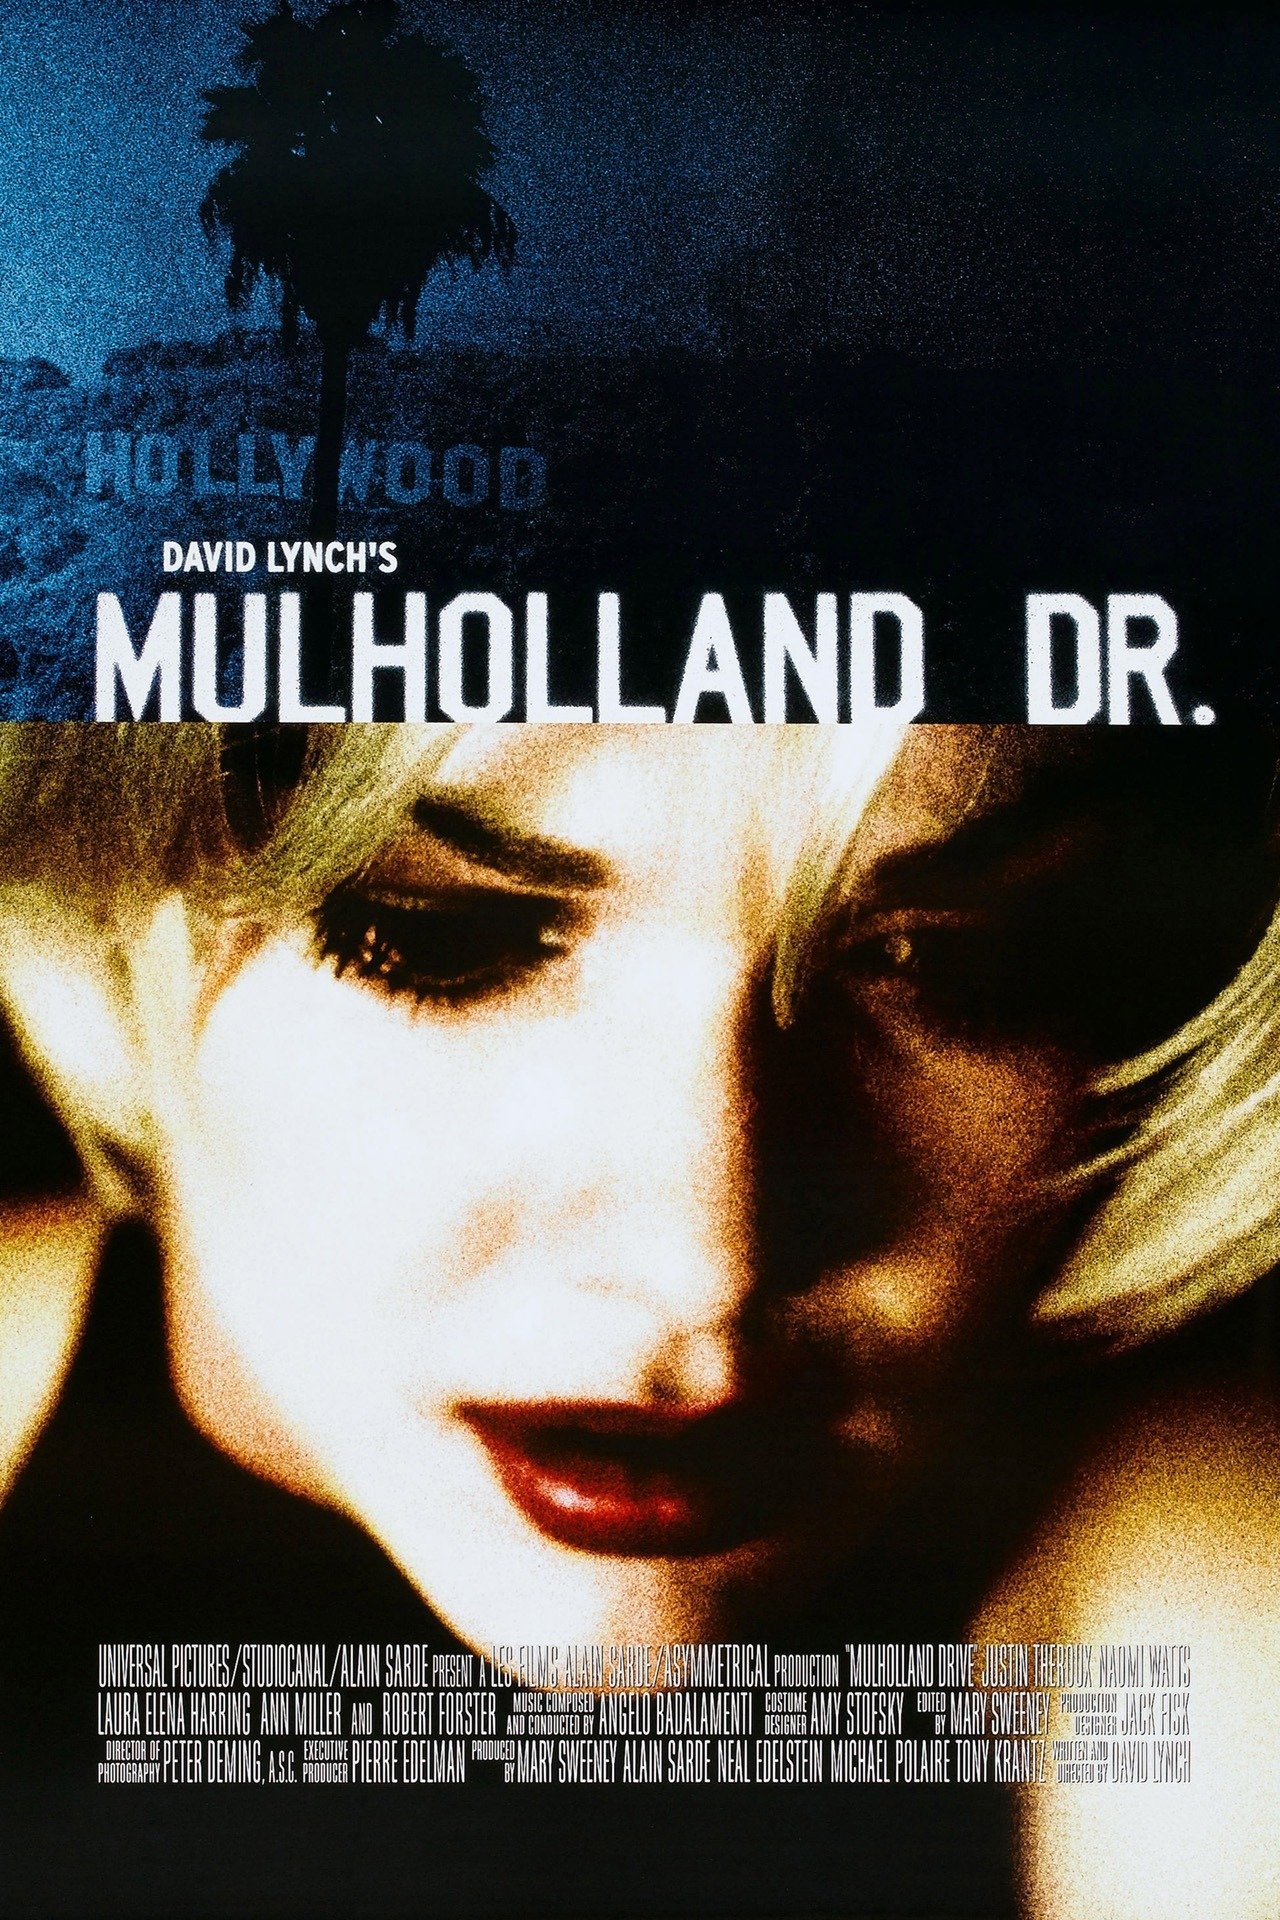 amee parmar recommends mulholland drive full movie free pic